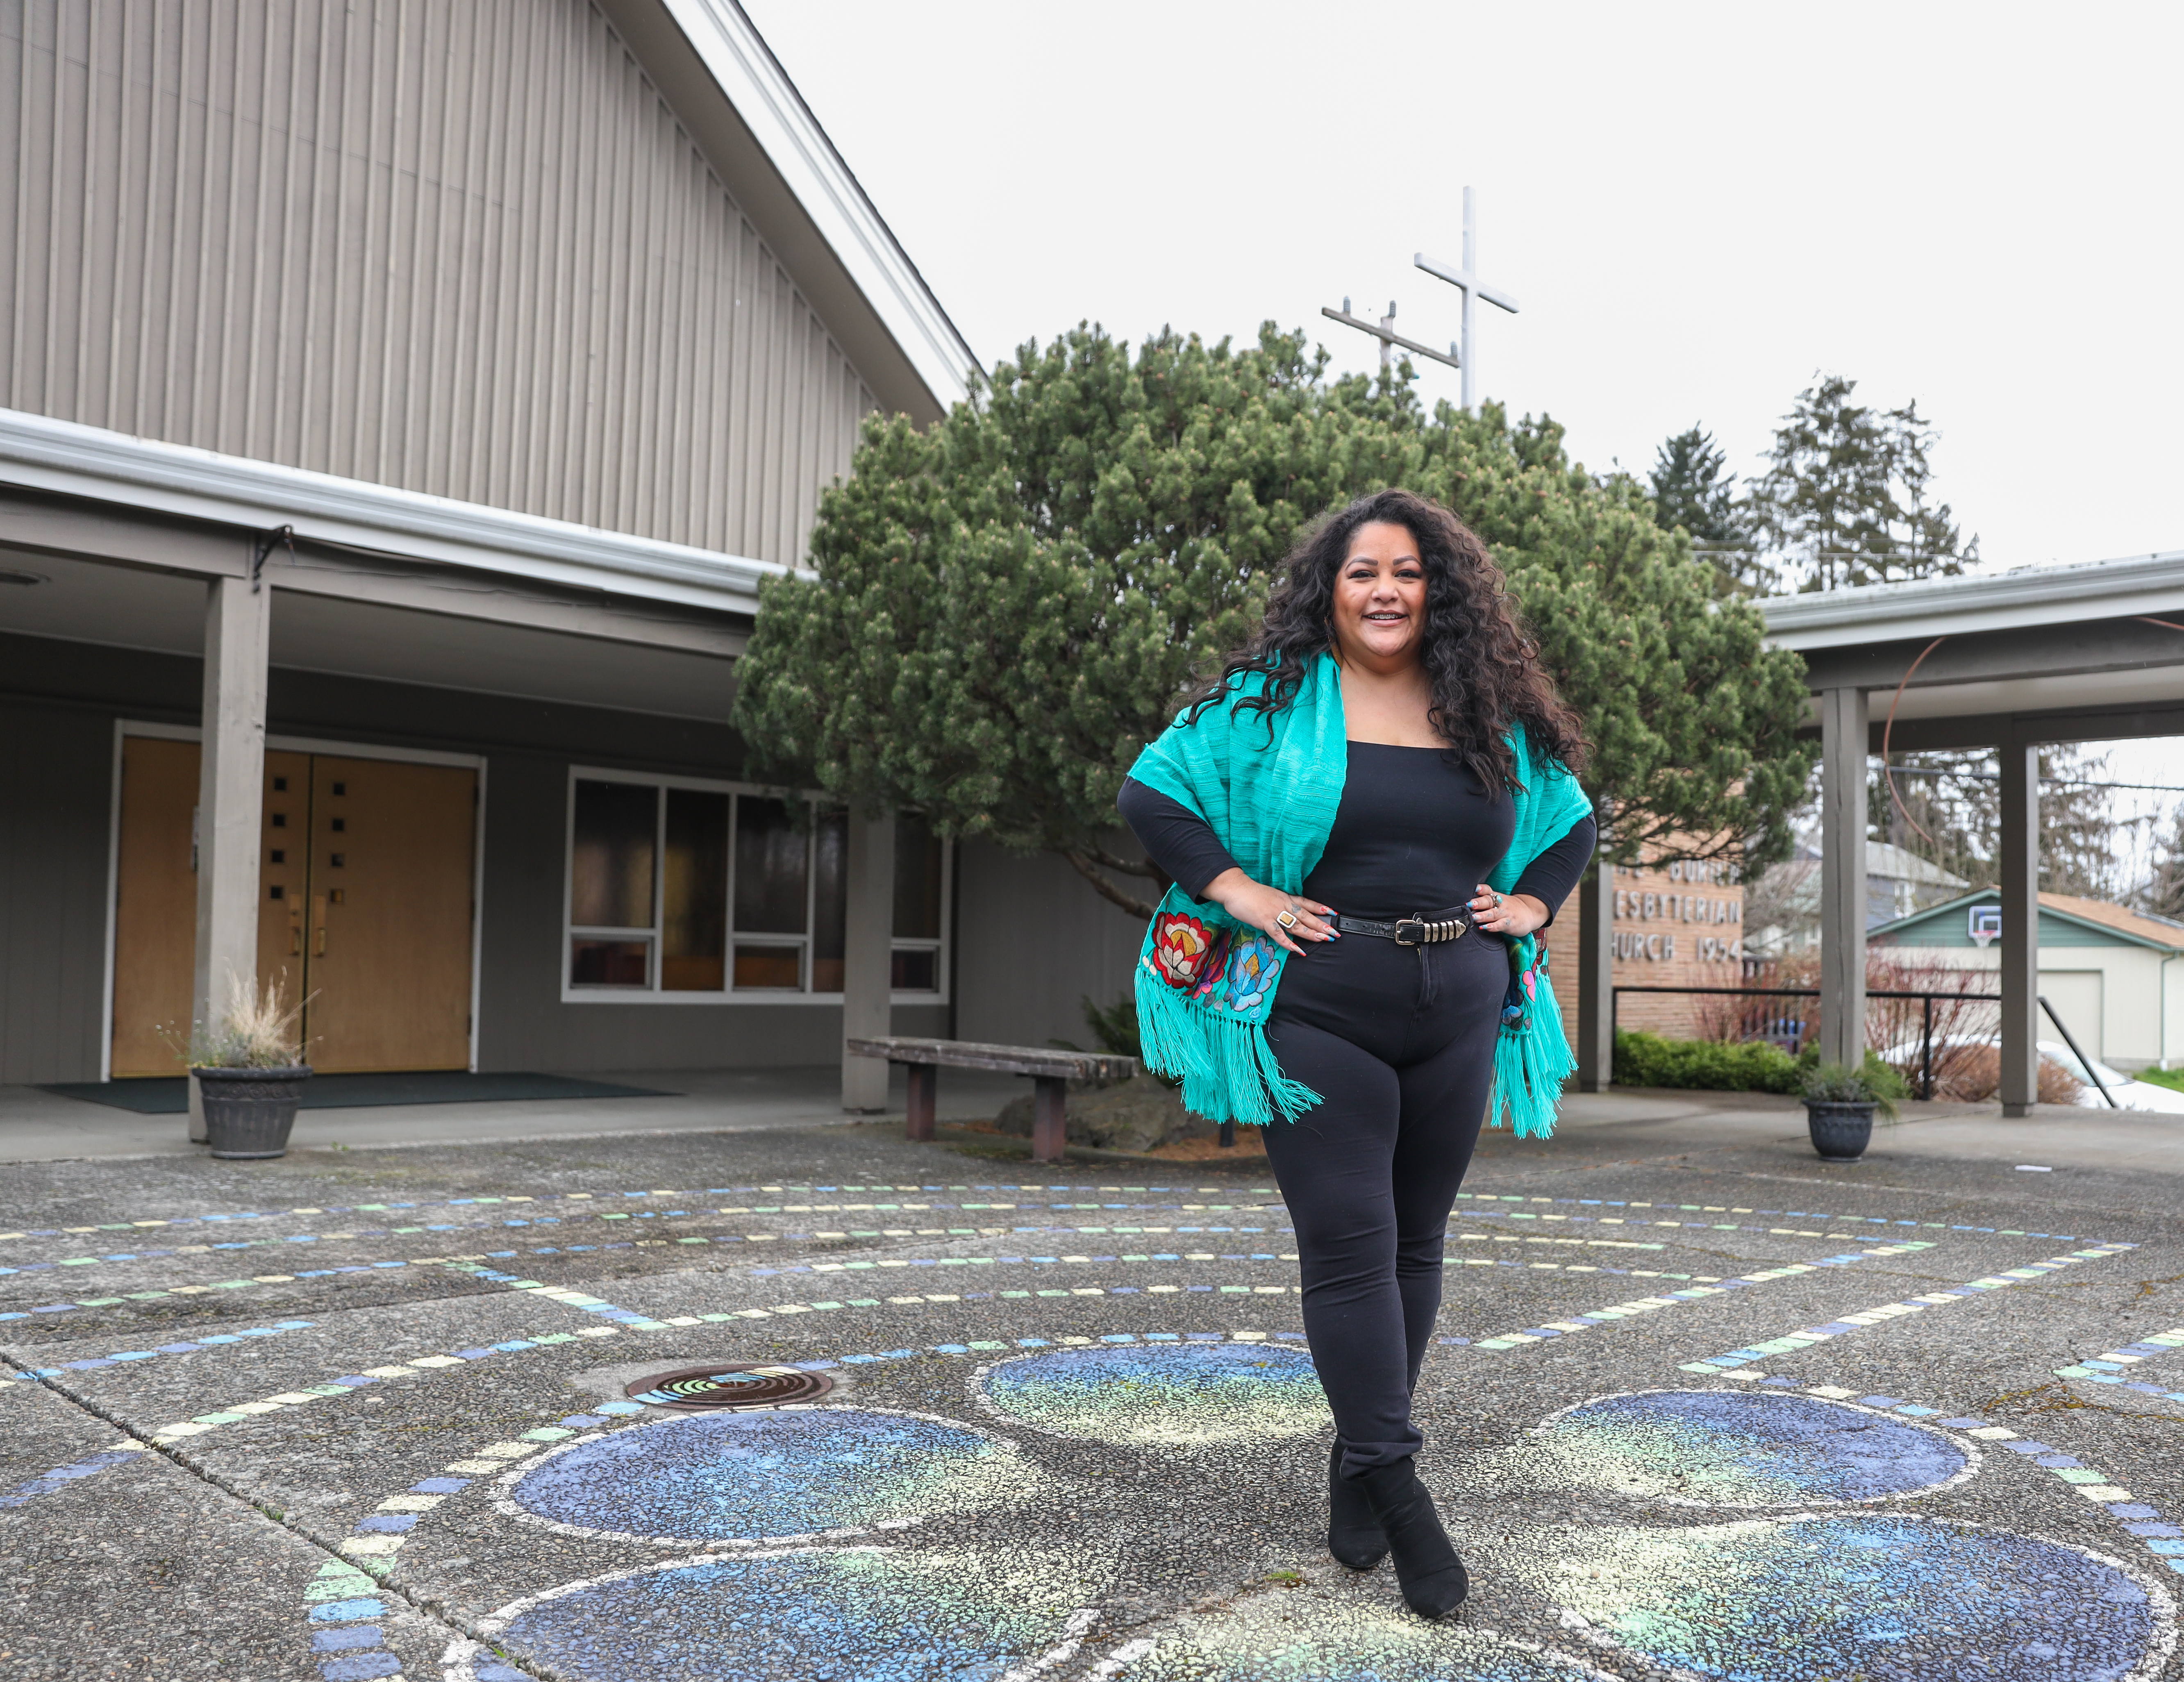 Roxana, wearing a turquoise shawl, black pants and shirt standing in front of the Lake Burien Presbyterian Church ©️ Bill & Melinda Gates Foundation/Alex Garland